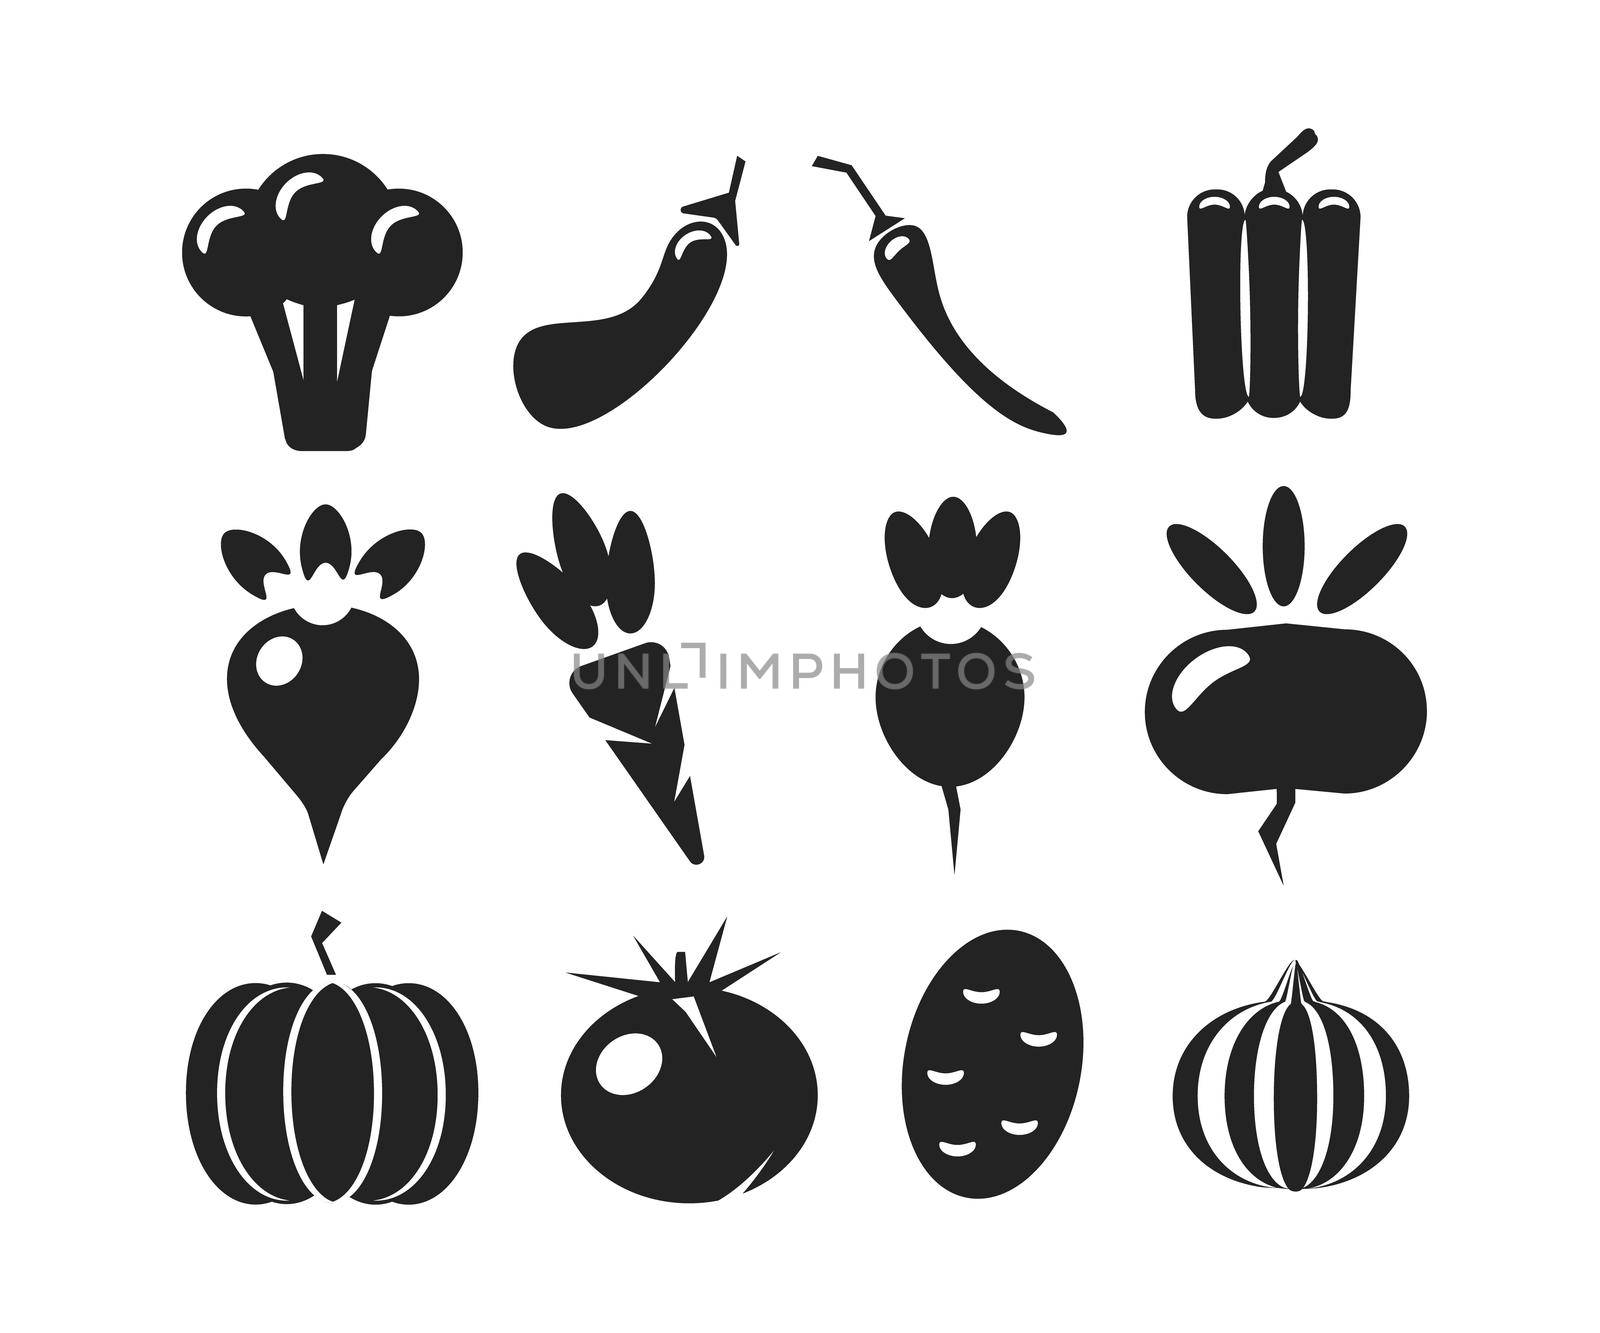 set of black silhouettes various vegetables isolated on a white background. by Alxyzt